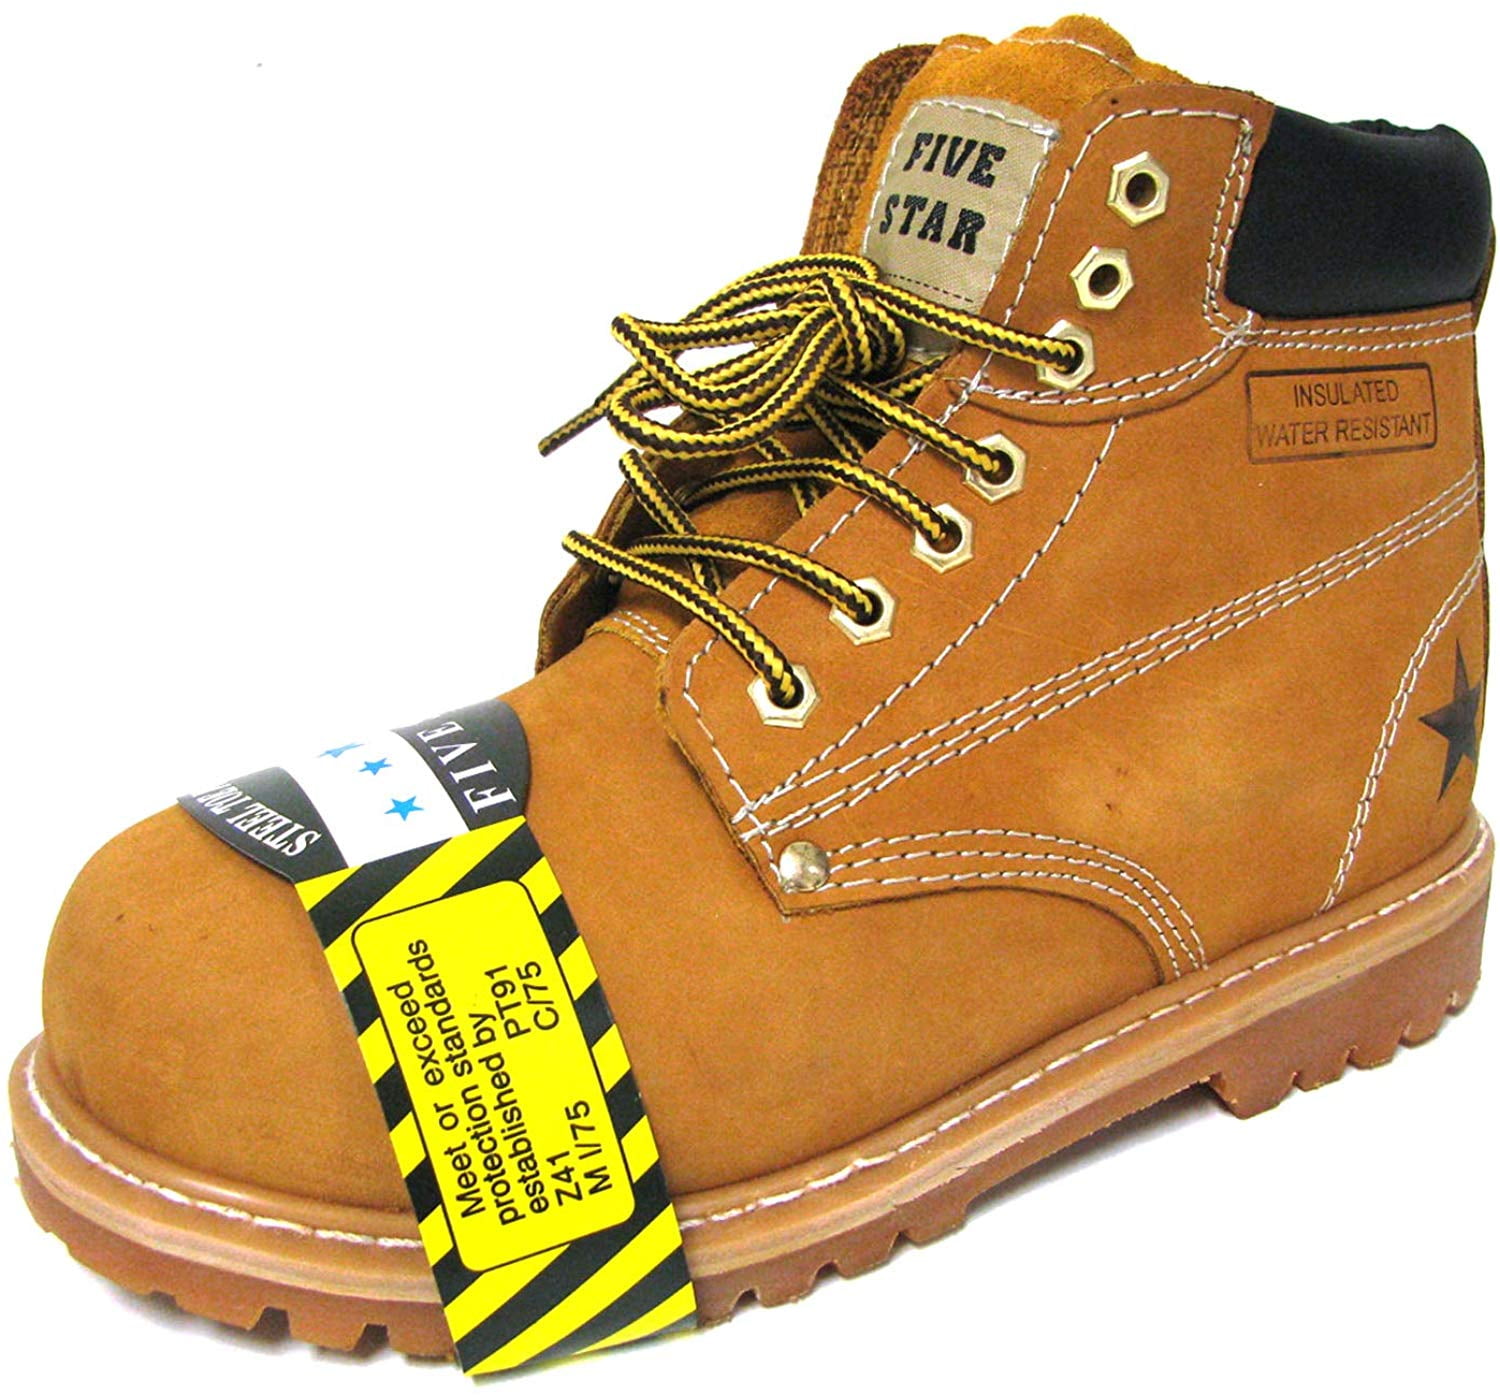 oil resistant work boots